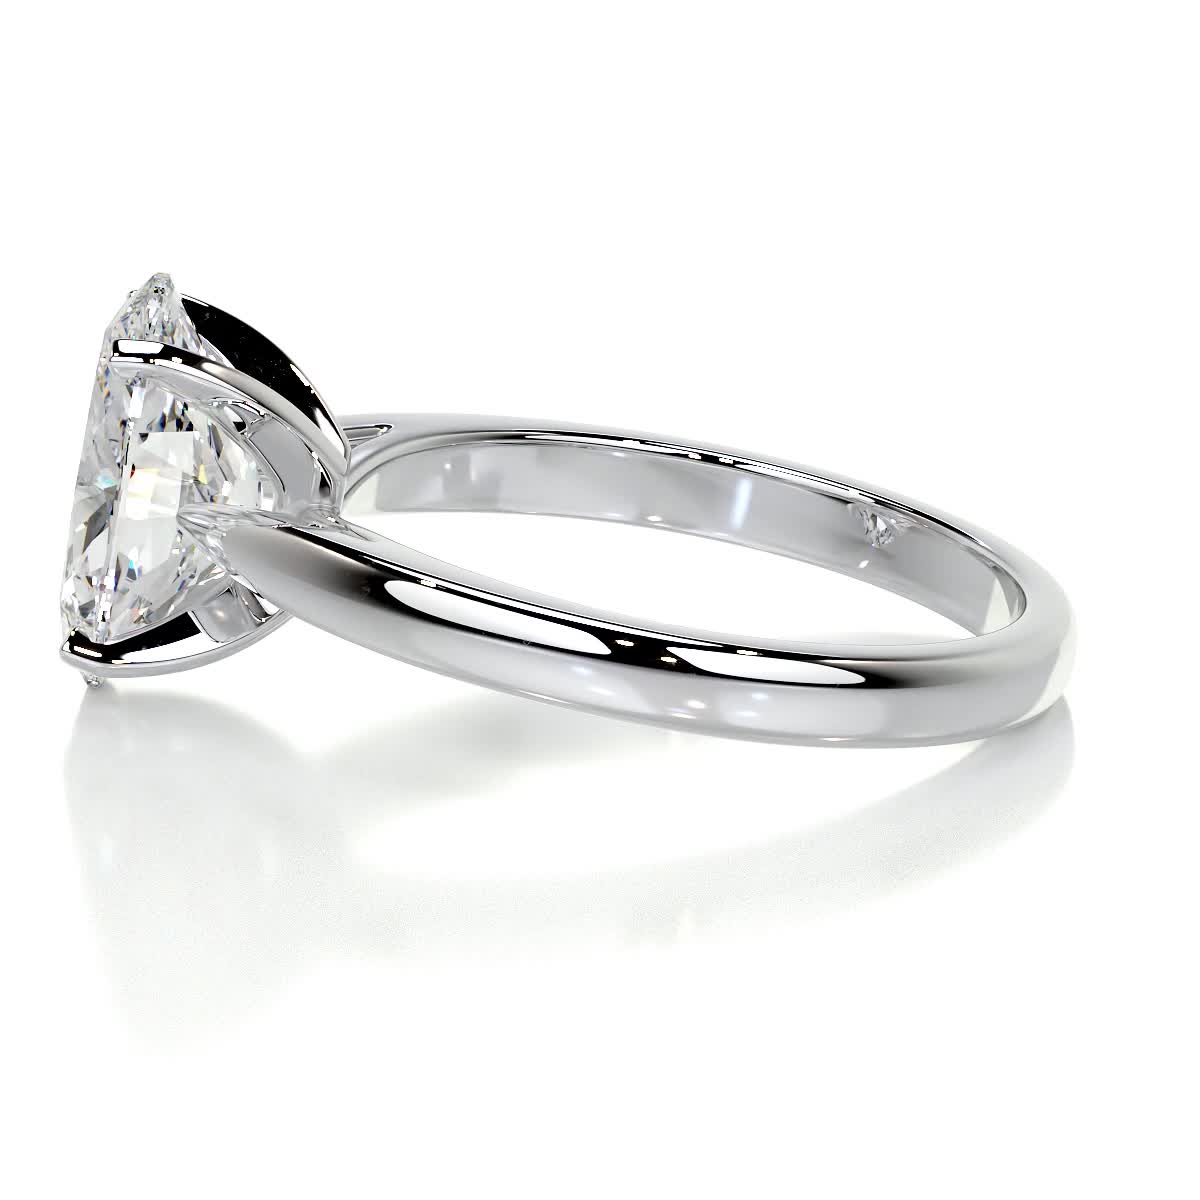 2.0 CT Oval Solitaire CVD G/VS2 Diamond Engagement Ring 4